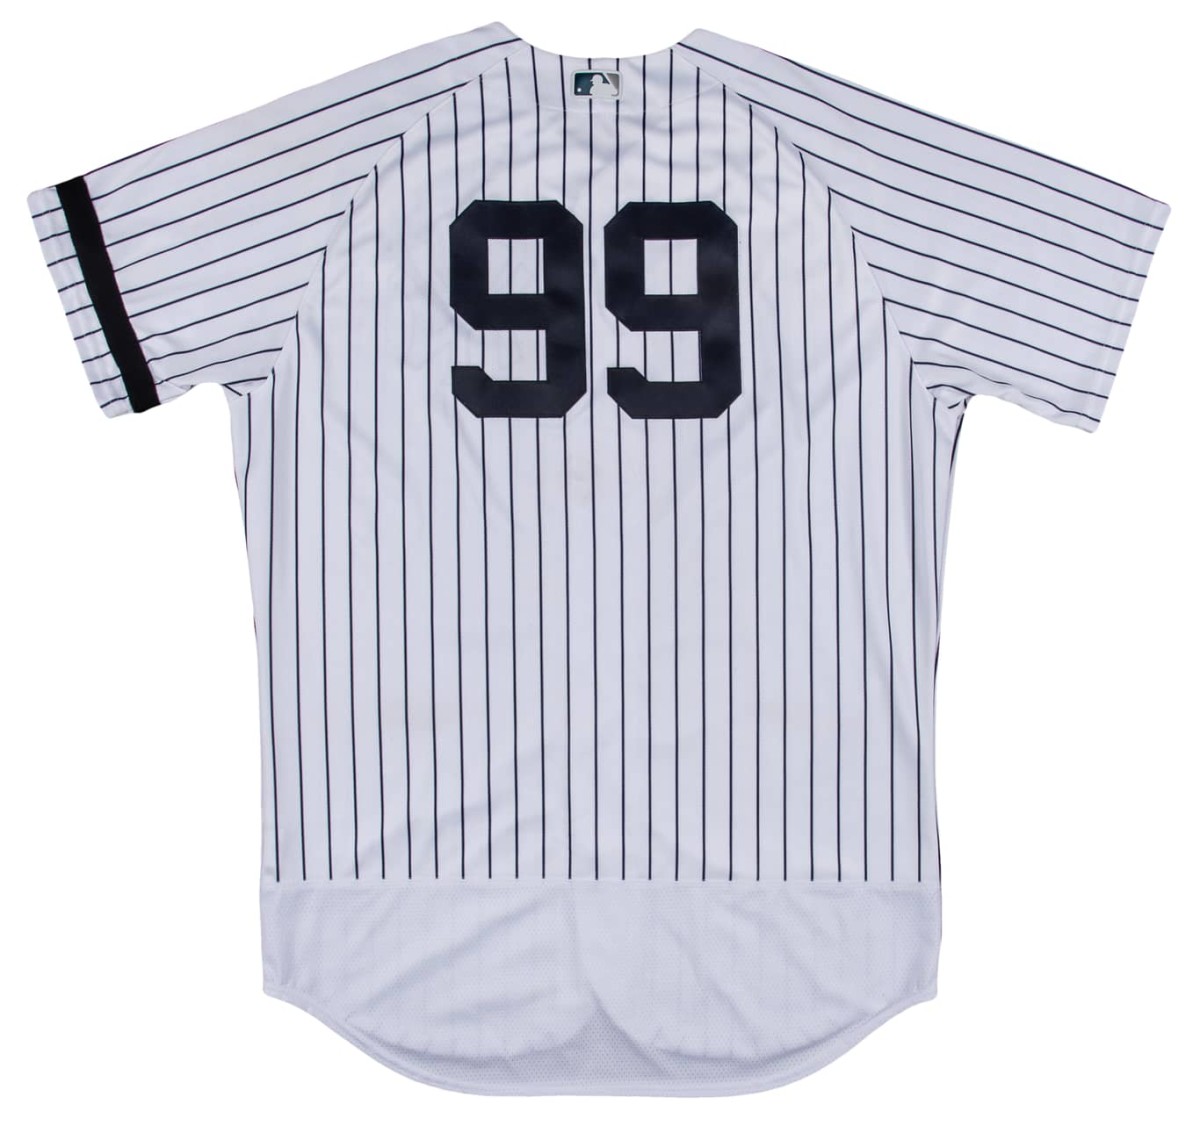 2017 Aaron Judge game-used home jersey worn when he set the AL rookie home run record with 52.